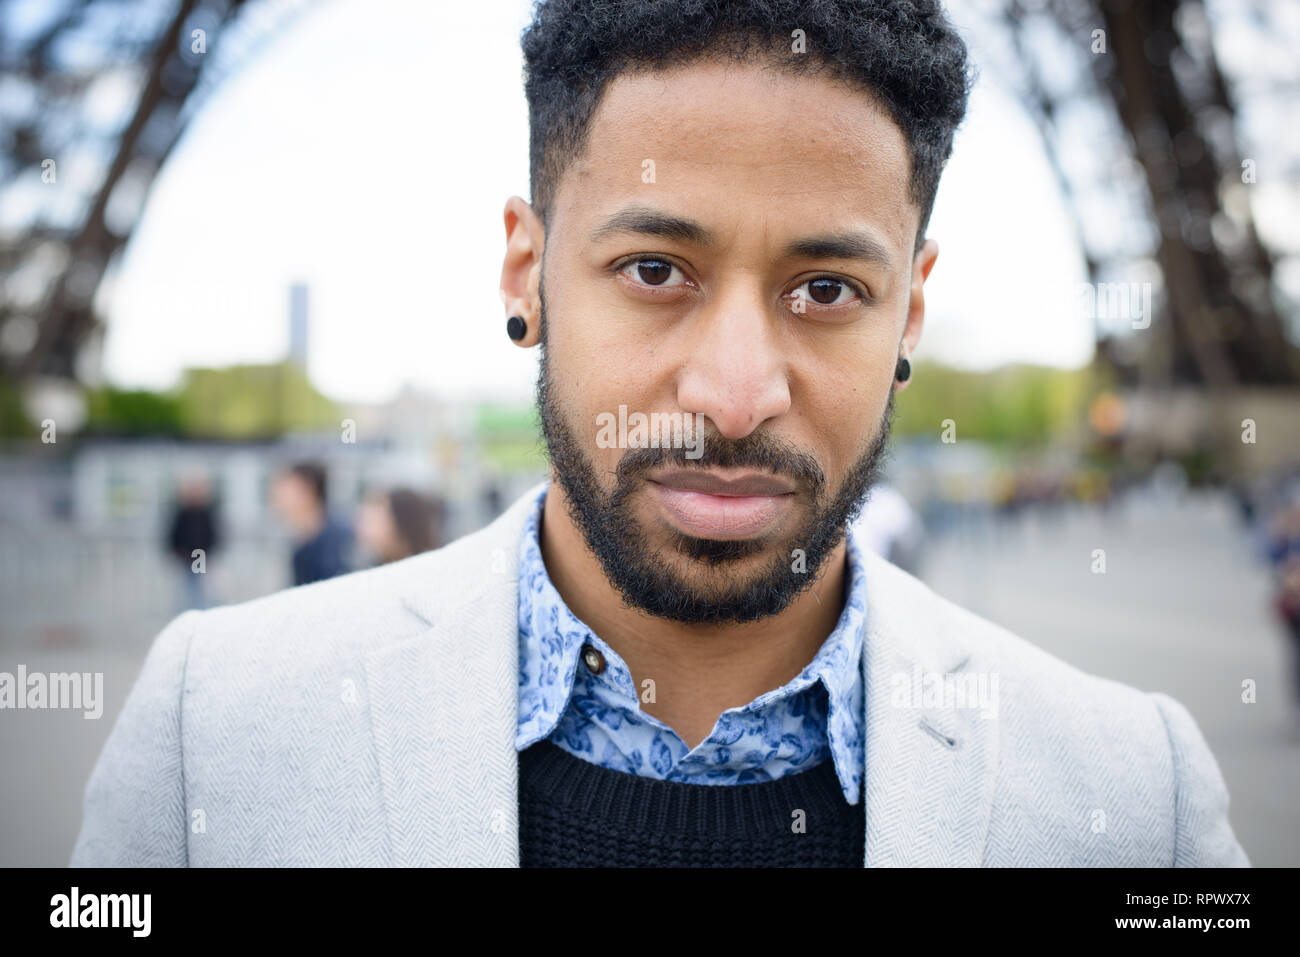 Portrait of serious, fashionable young man of African descent under the Eiffel tower in Paris, France. Stock Photo